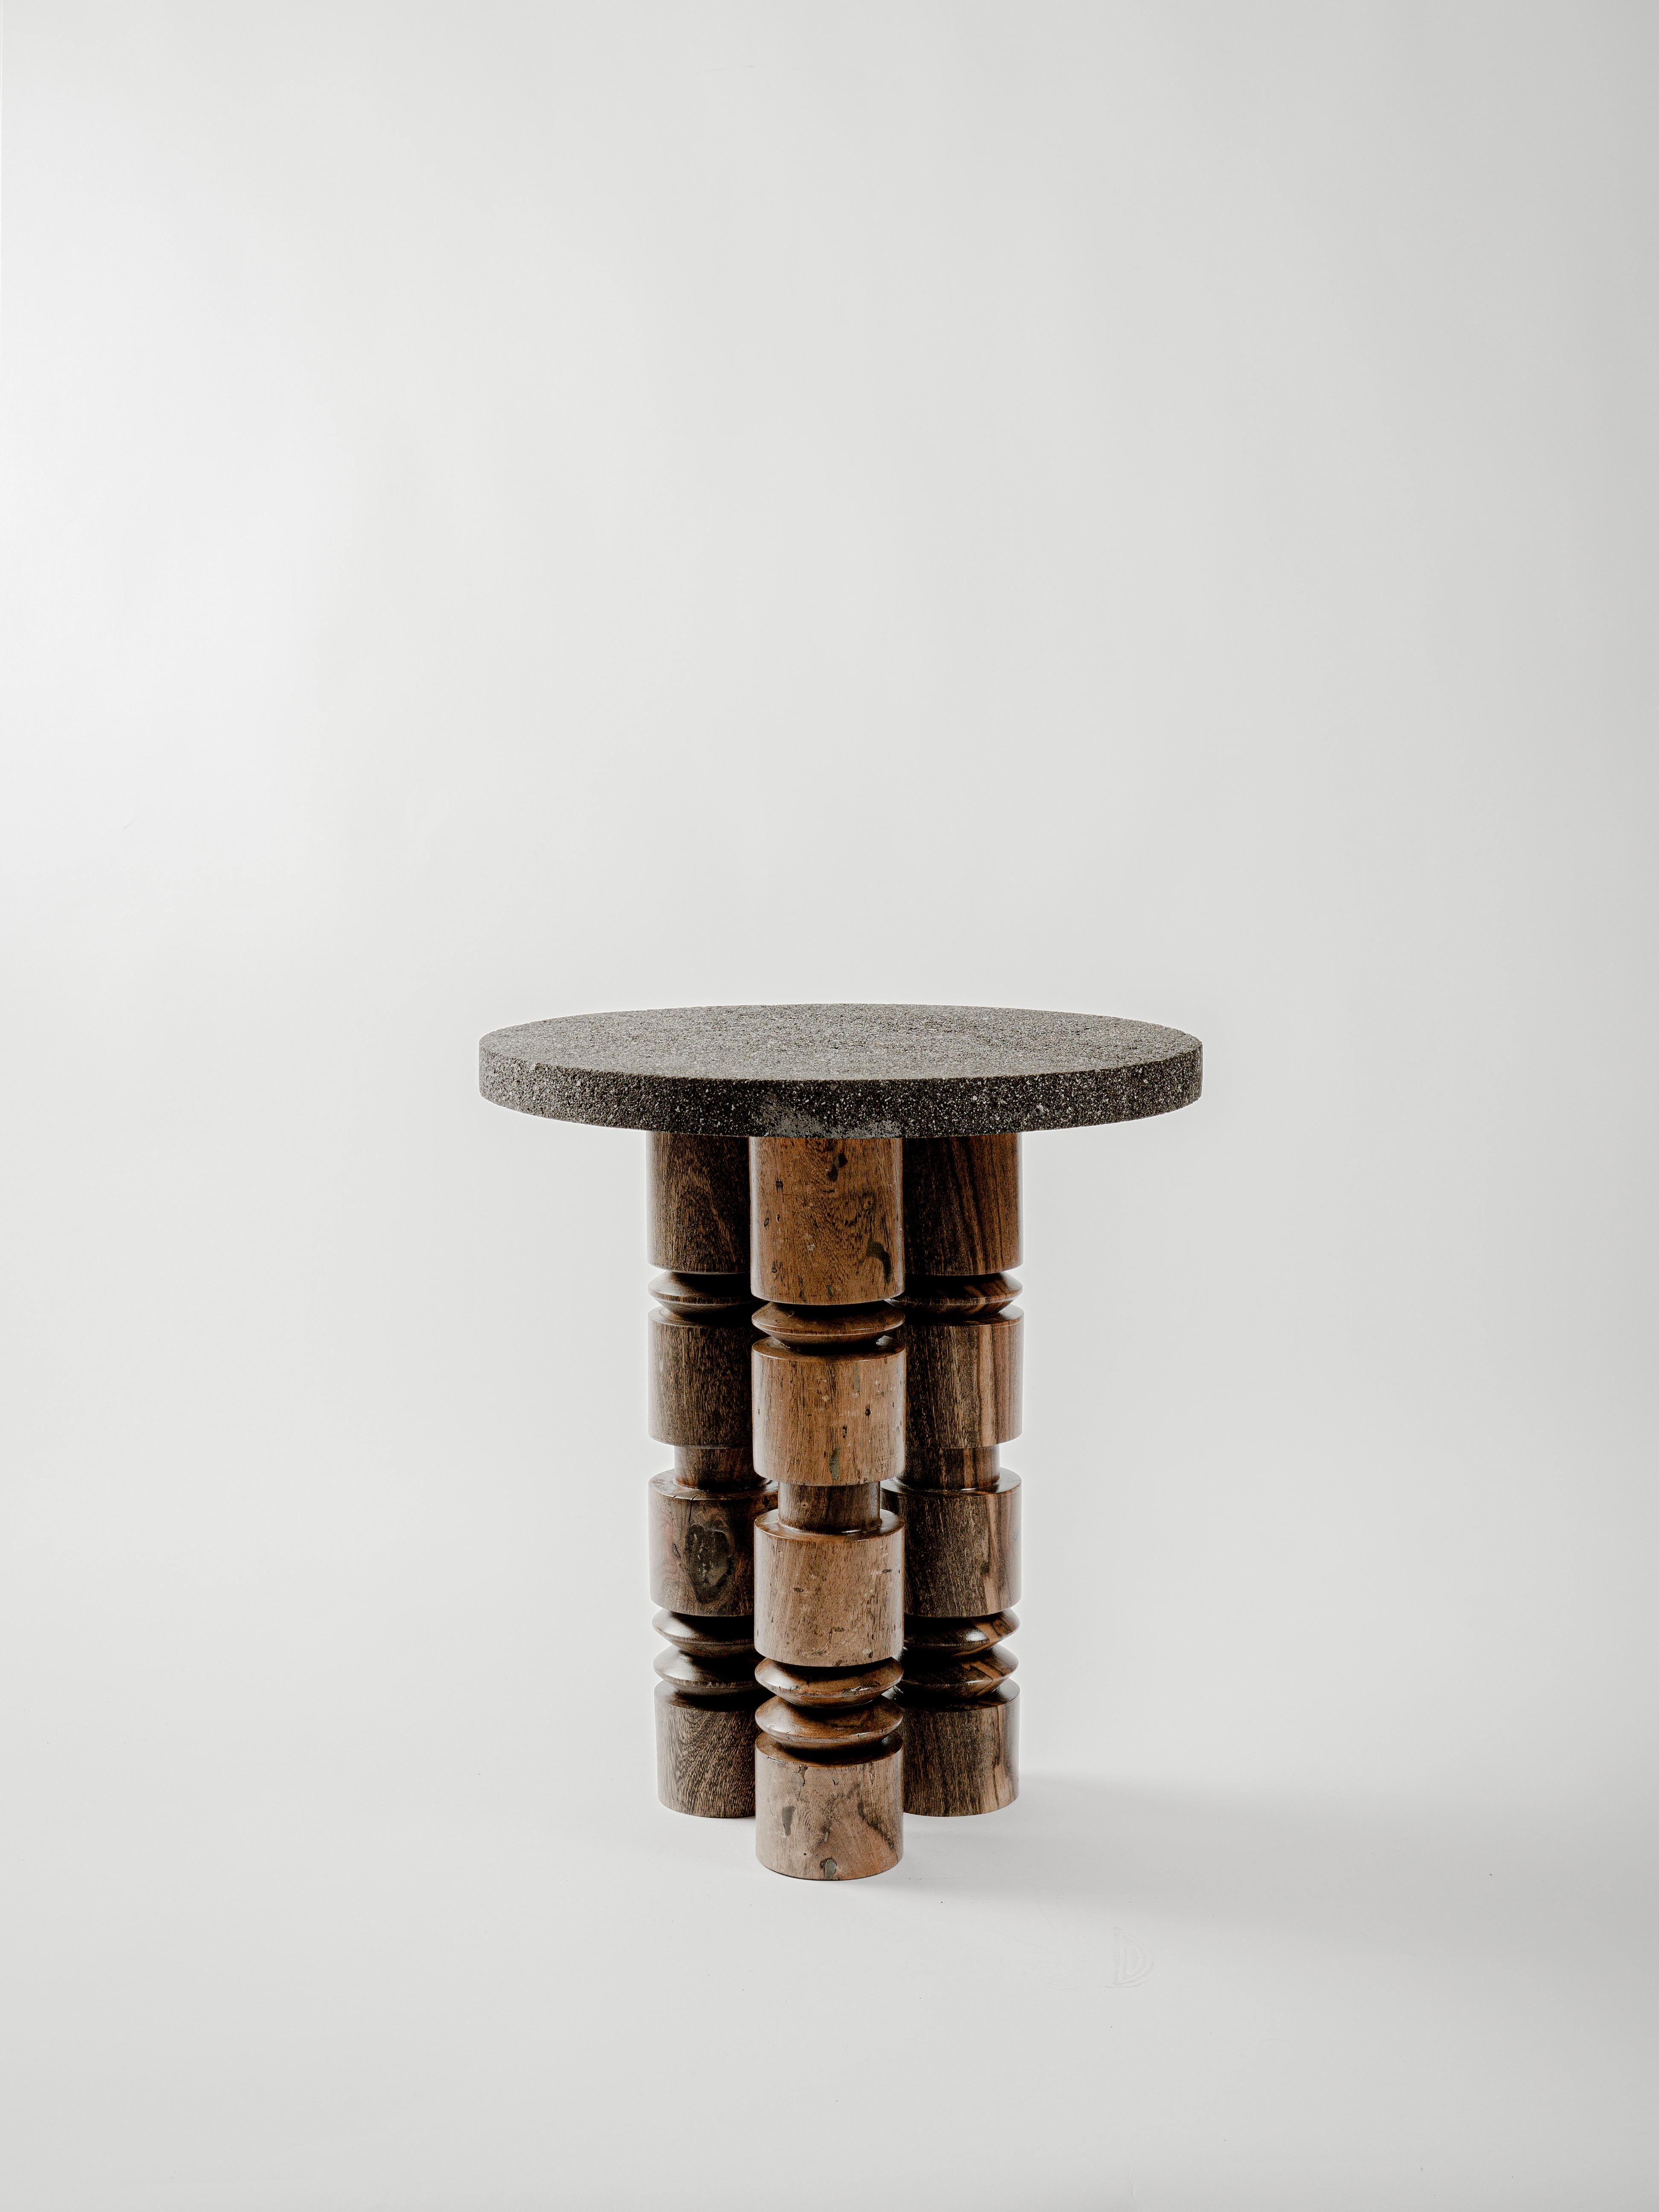 Volcanic and wood Totem 01 Side Table by Daniel Orozco
Material: Solid wood, Volcanic Stone
Dimensions: D 50 x H 45 cm

Totem with volcanic stone cover and base of 3 totems of wood turned with natural finish.Handmade by Mexican artisans.

Daniel